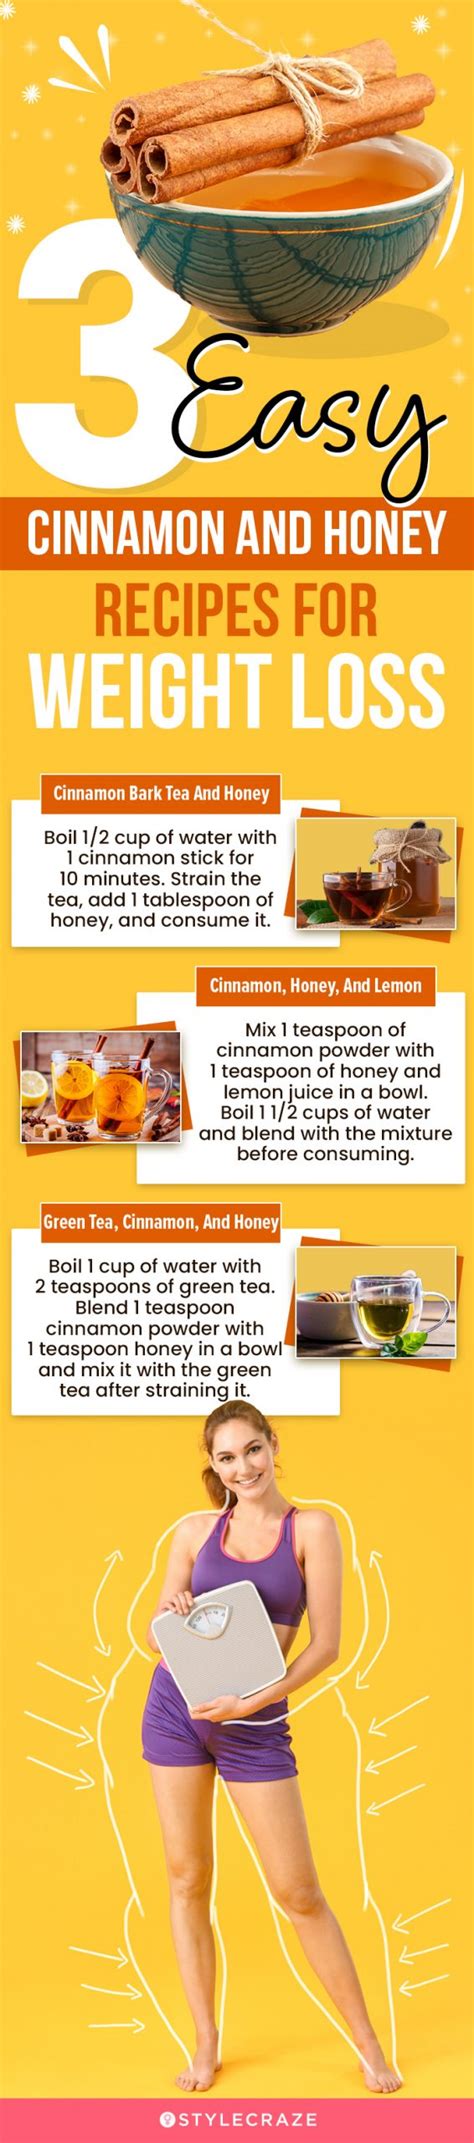 Cinnamon And Honey For Weight Loss How It Works Benefits And Side Effects